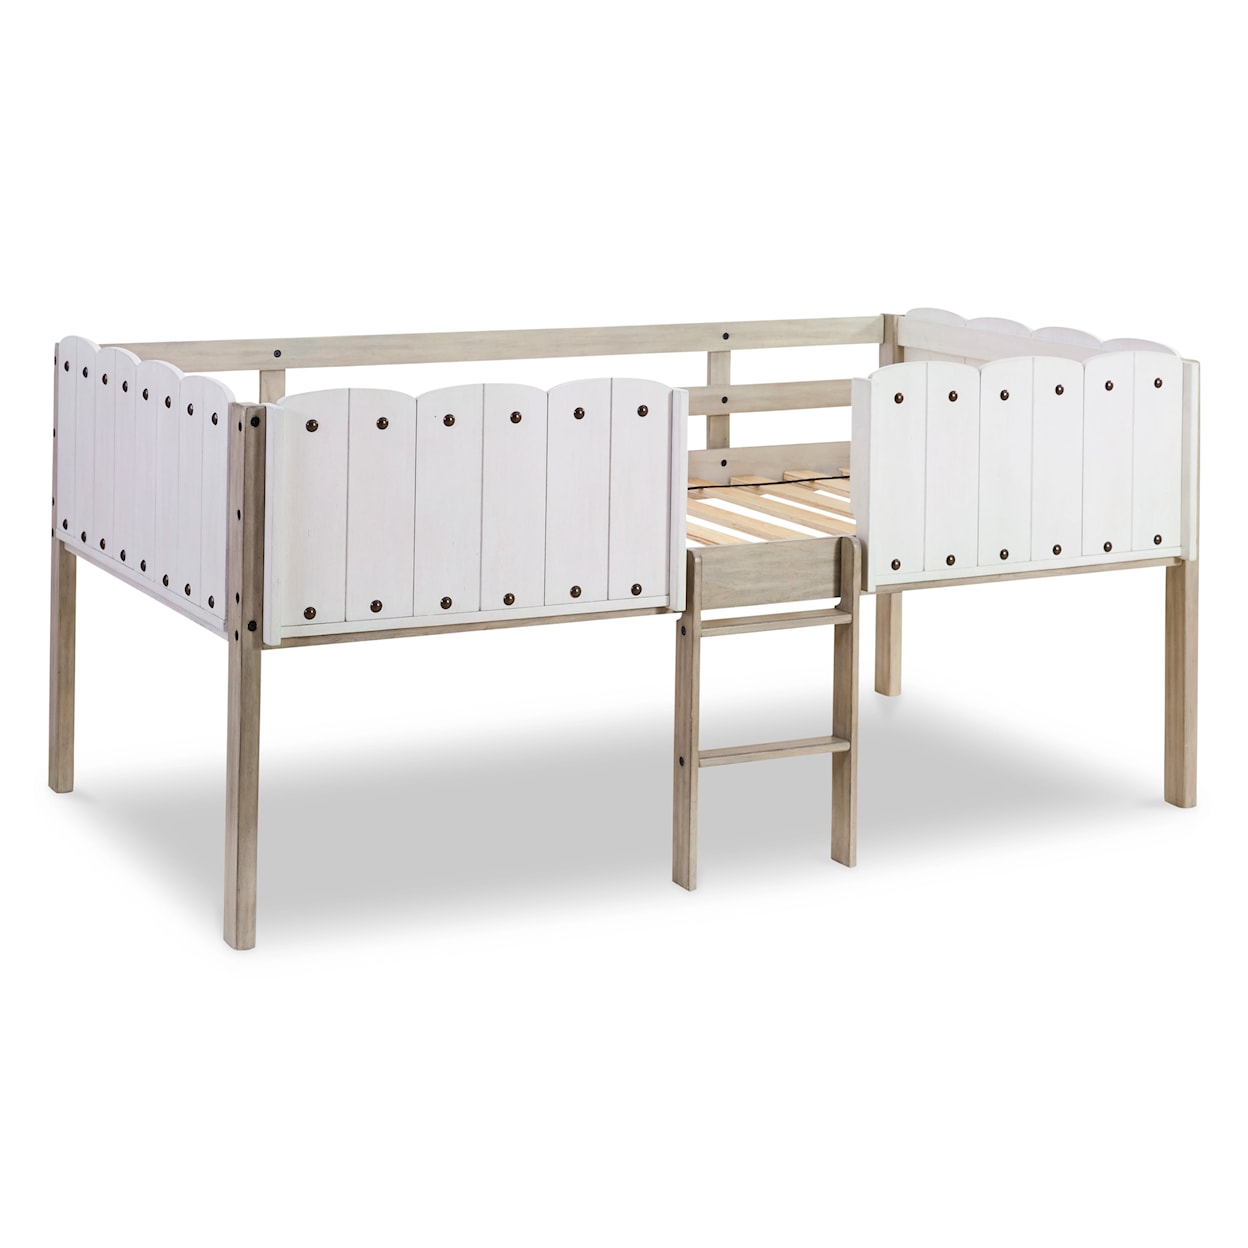 Signature Design by Ashley Furniture Wrenalyn Twin Loft Bed Frame